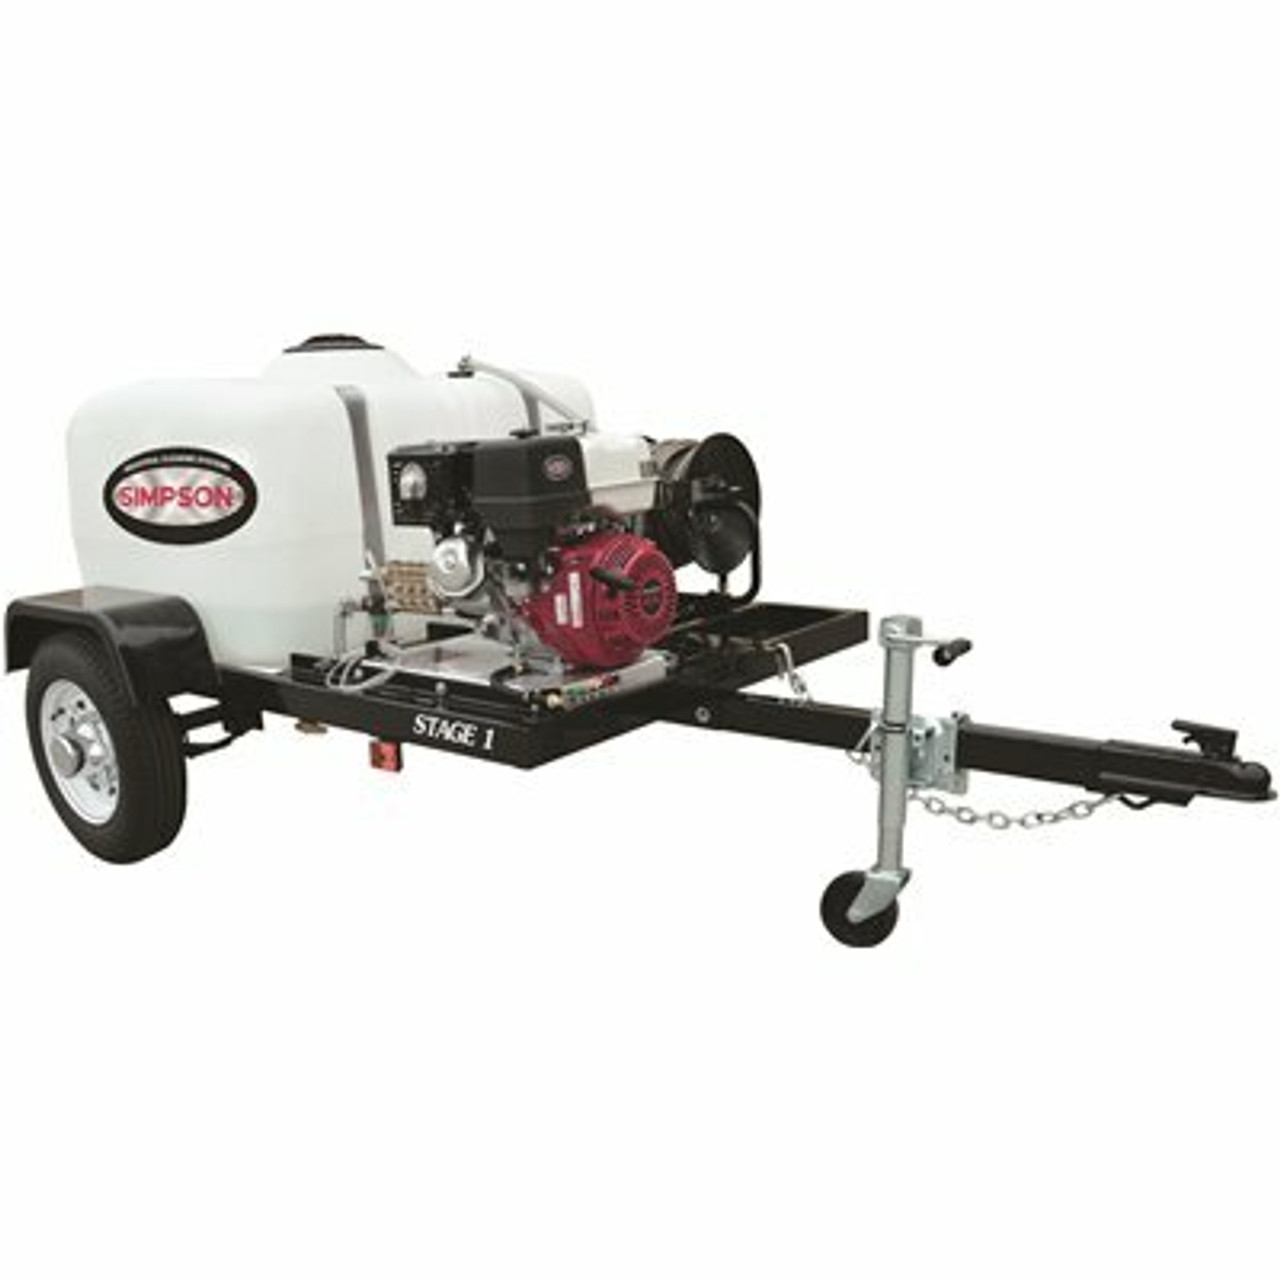 Simpson 95001 3800 Psi At 3.5 Gpm Honda Gx270 Cold Water Pressure Washer Trailer